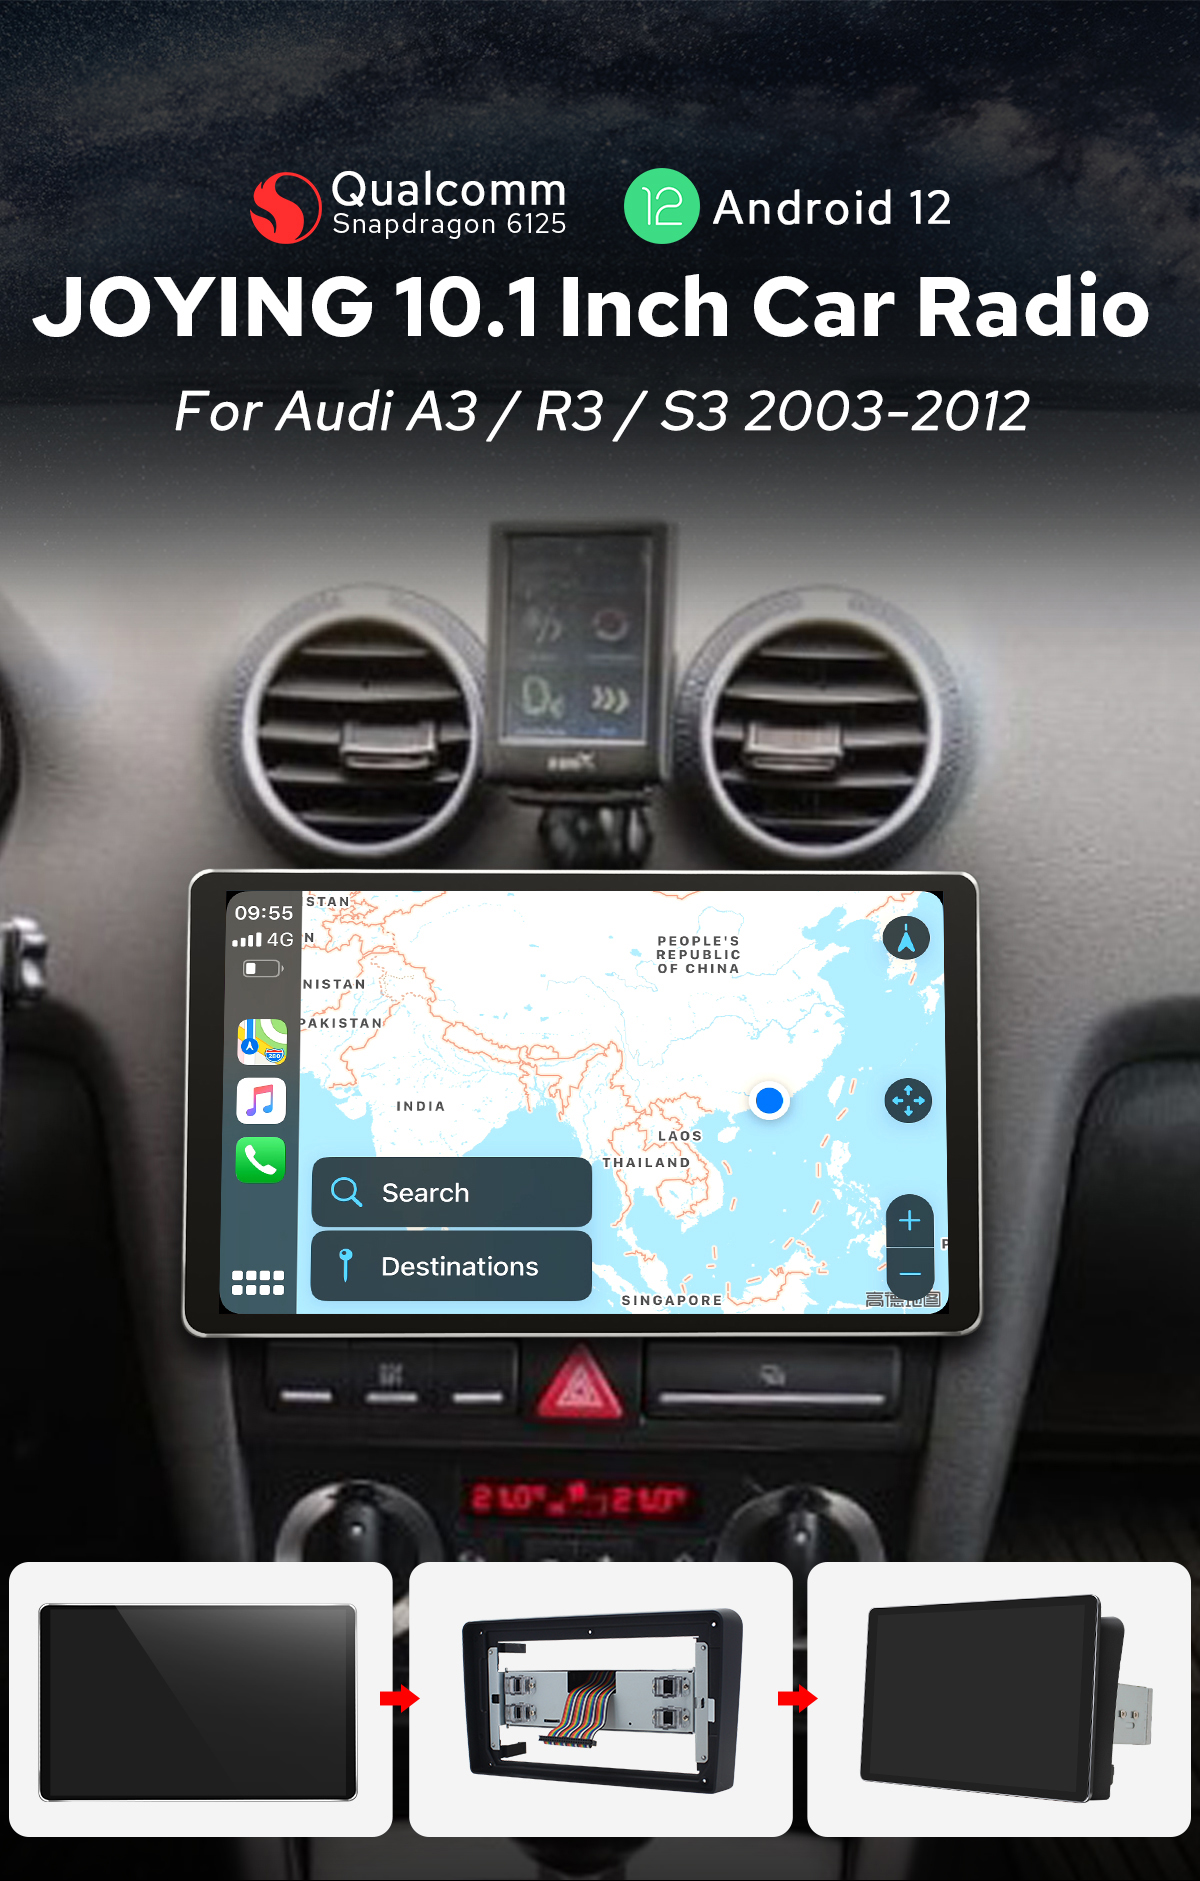 Newest Aftermarket Radio For Audi A3 R3 S3 2003-2012 With 10.1 Big